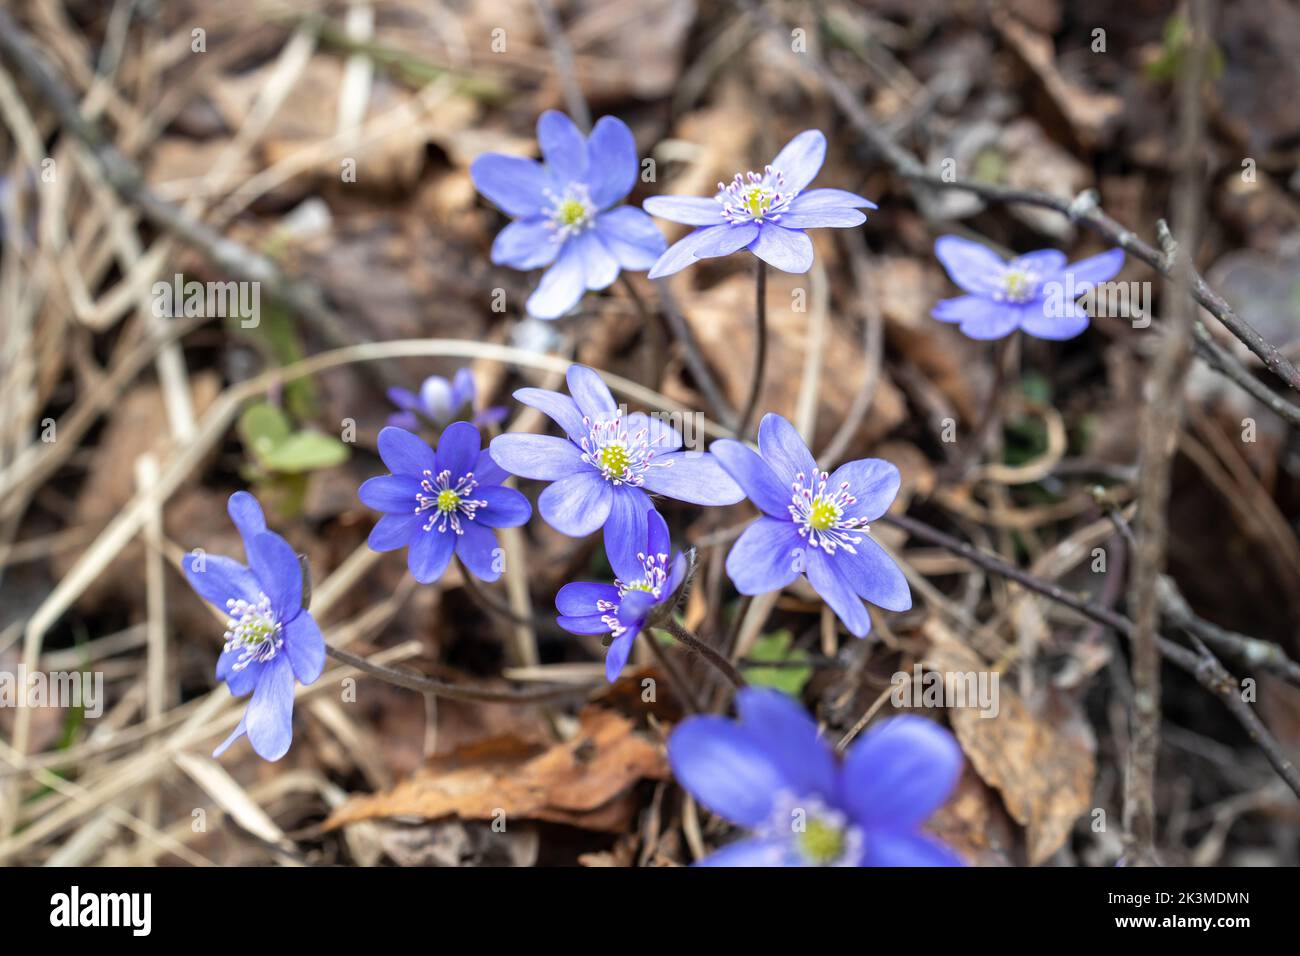 Hepatica is a genus of herbaceous perennials in the buttercup family, Stock Photo